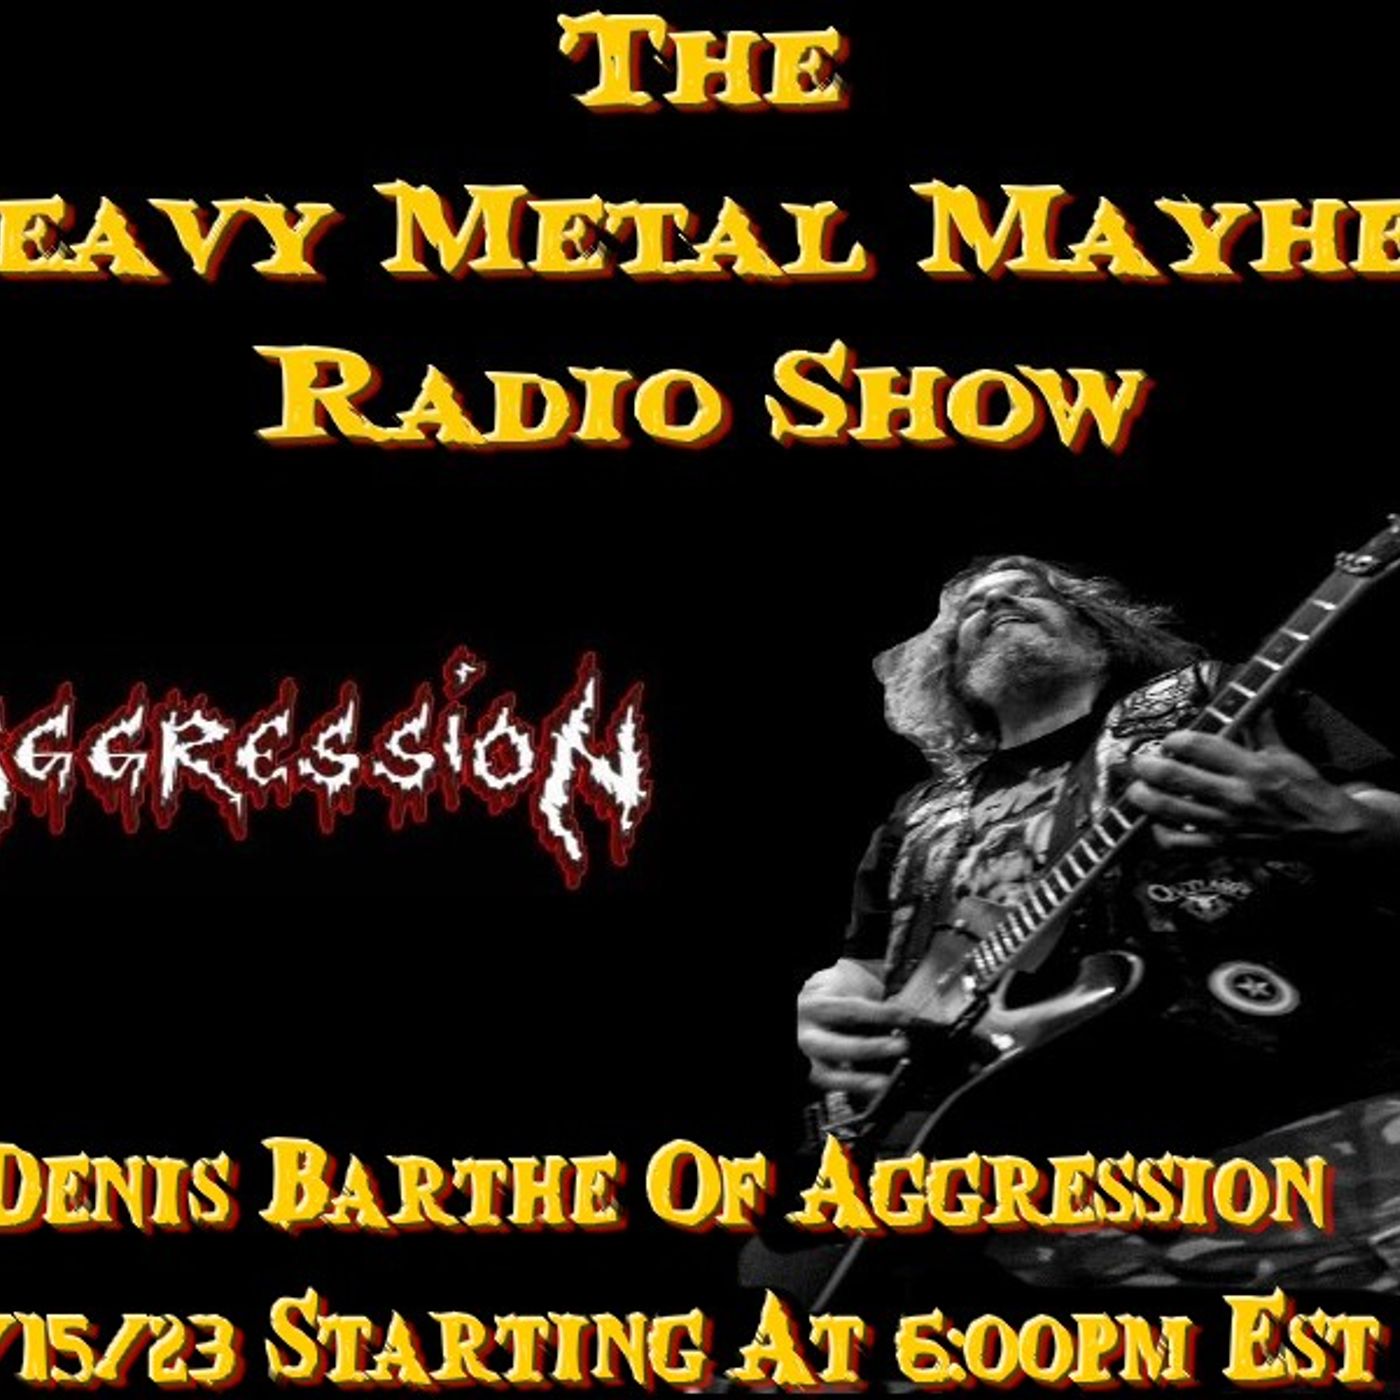 Guest Denis Barthe Of Aggression 1/15/23